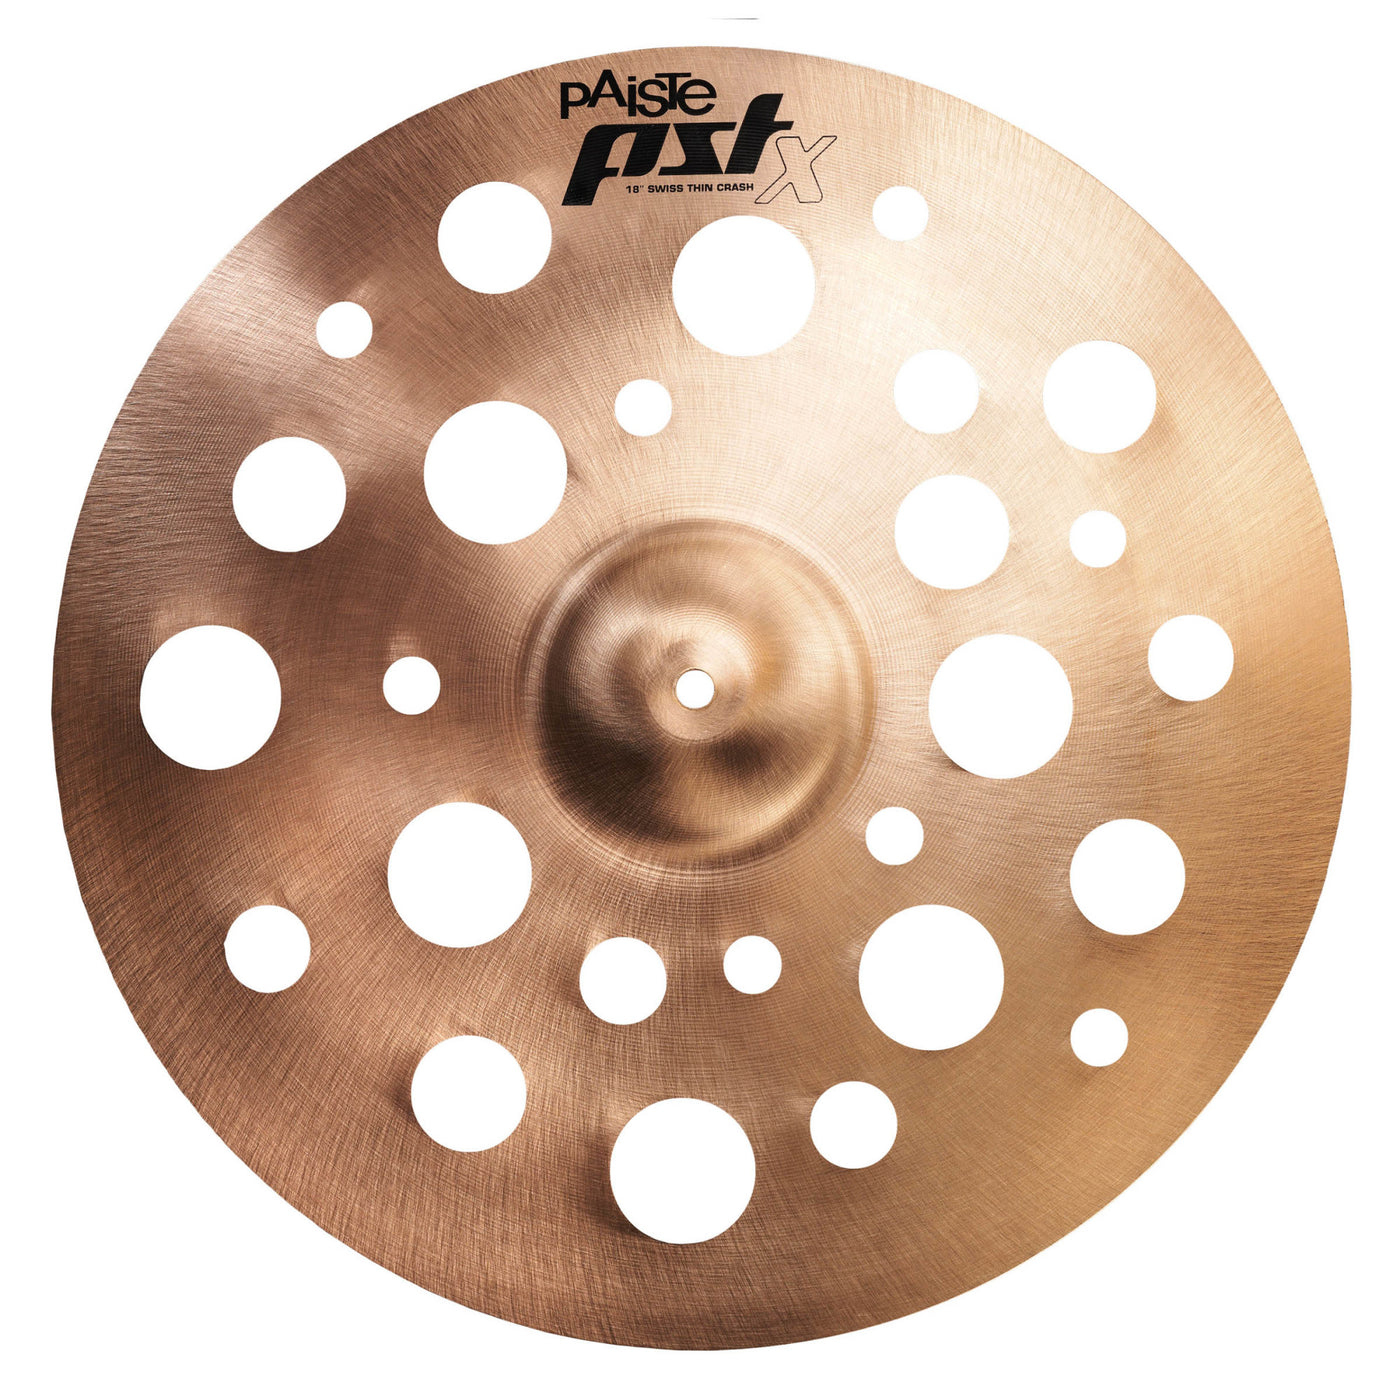 Paiste 1255210 PST X Swiss Splash Cymbal, PST X Series, Percussion Instrument for Drums, 18"